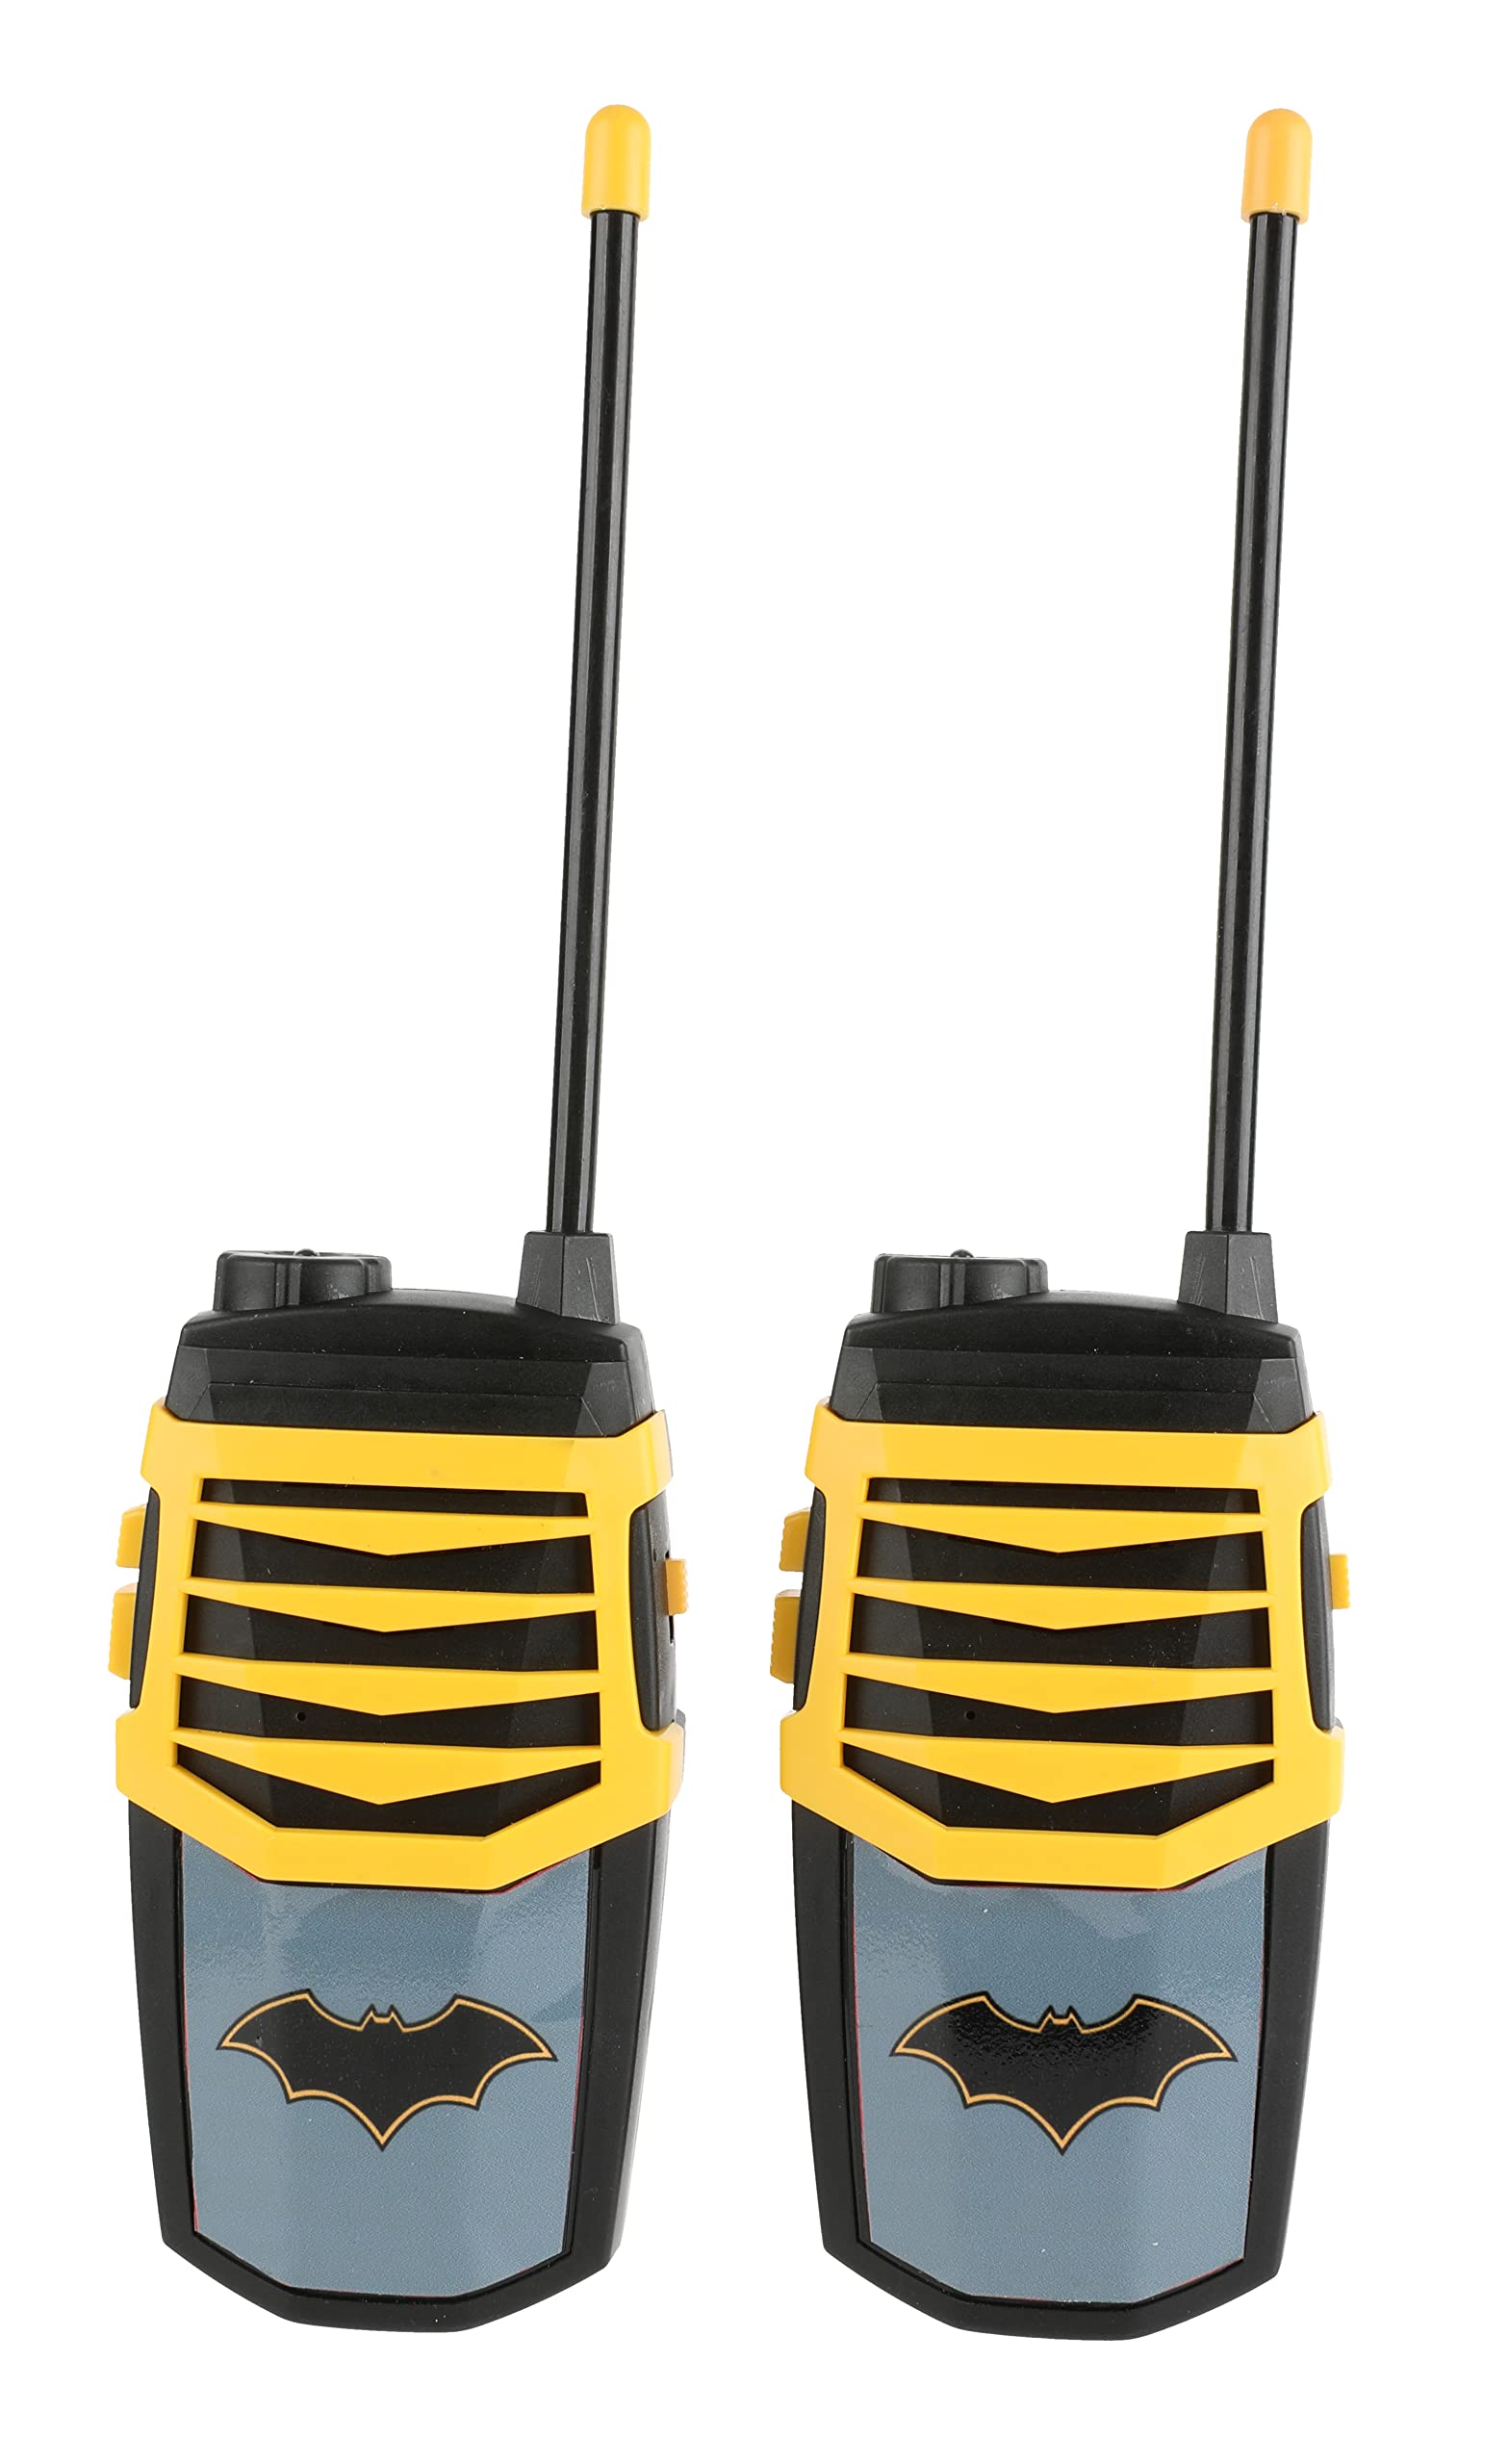 Batman Night Action Molded Walkie Talkies for Kids WT2-01082 | Safe and Flexible Antenna, 1000ft Range, Easy-to-Use Power Switch, Belt Clip, Pack of 2, Stylish Appearance, 2-Pack